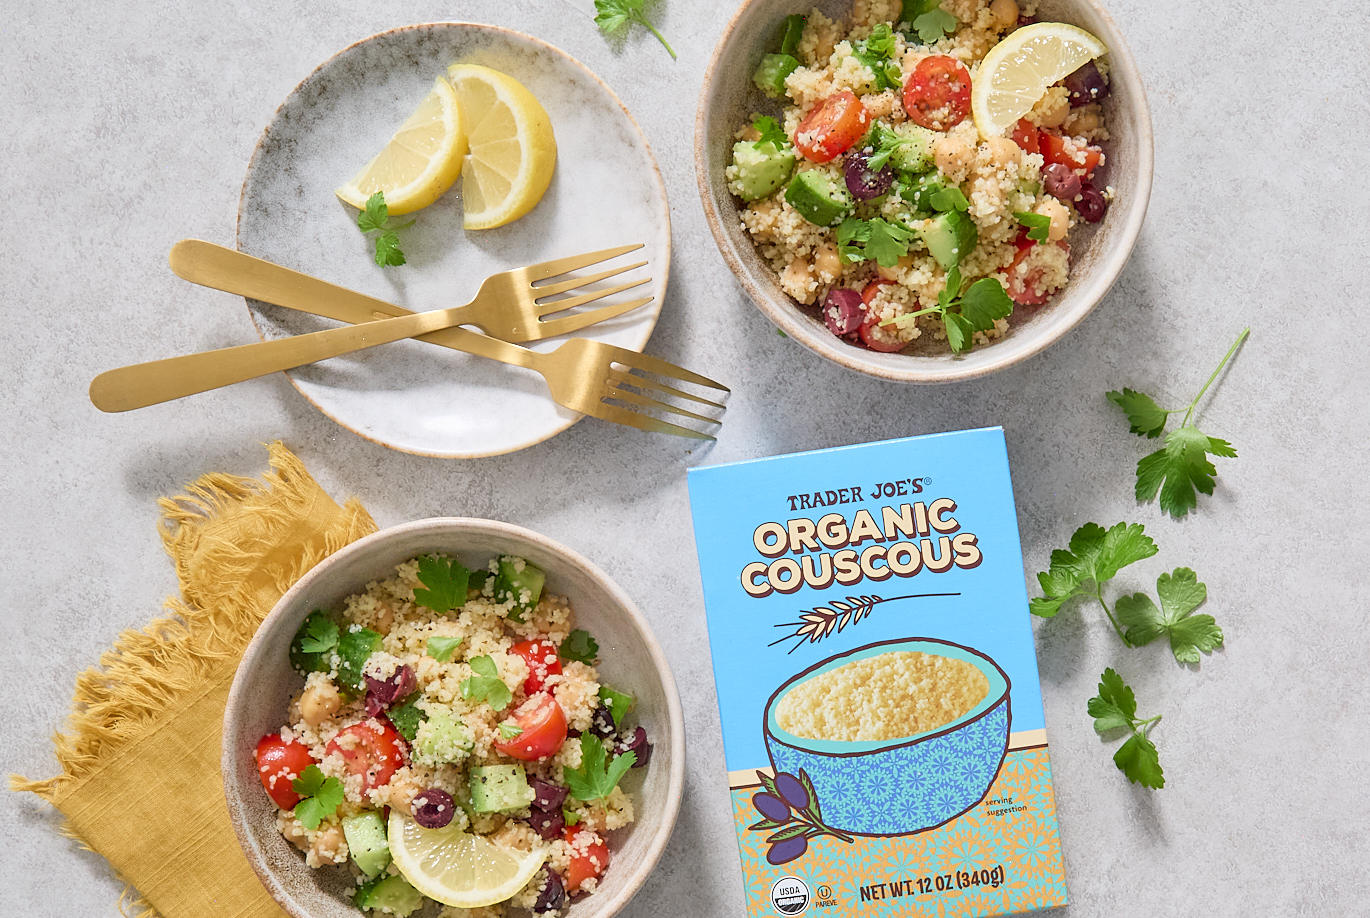 Trader Joe's Organic Couscous, in recipe for Quick Couscous Salad; in two bowls - couscous with chopped cucumber, tomato, kalamata olives parsley and lemon wedge for garnish